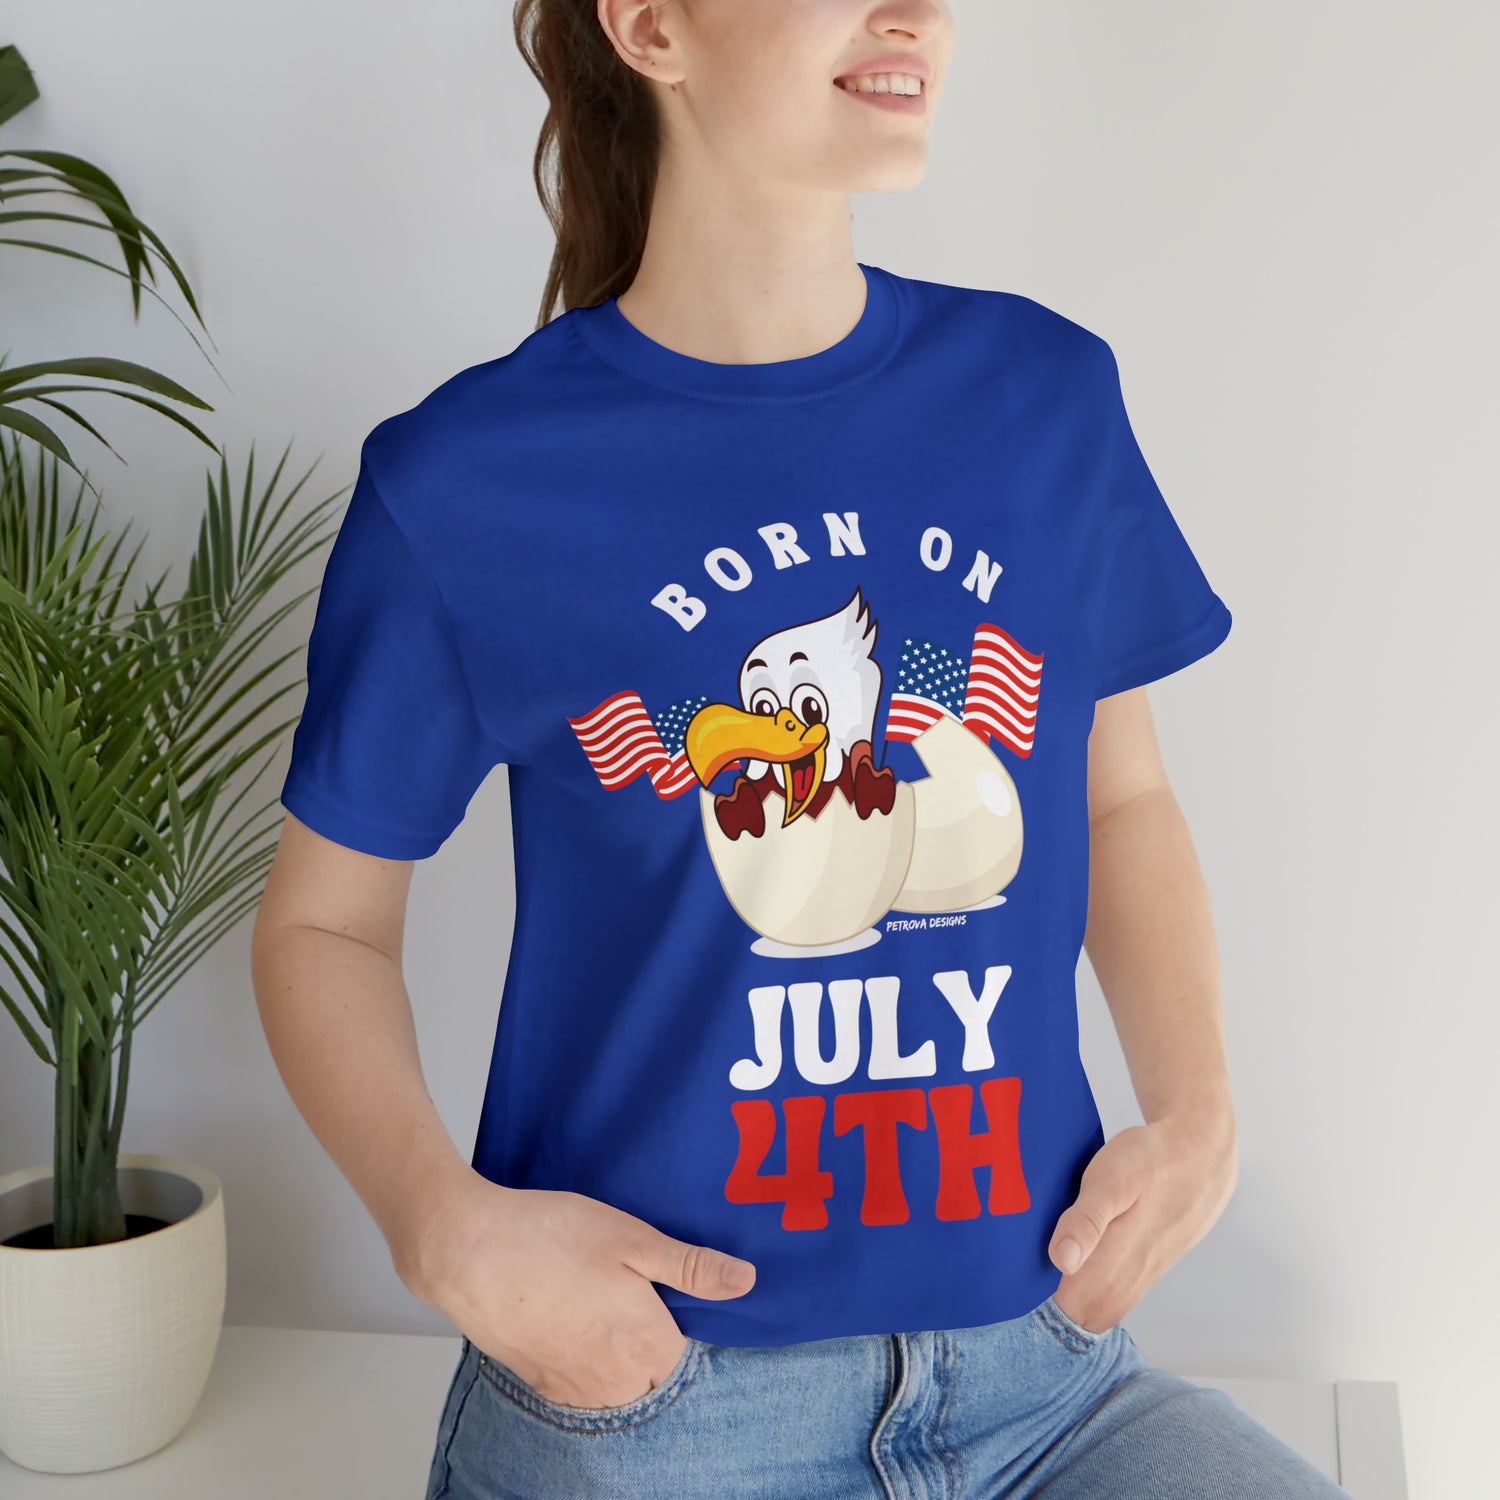 True Royal T-Shirt Tshirt Design Gift for Friend and Family Short Sleeved Shirt 4th of July Independence Day Petrova Designs